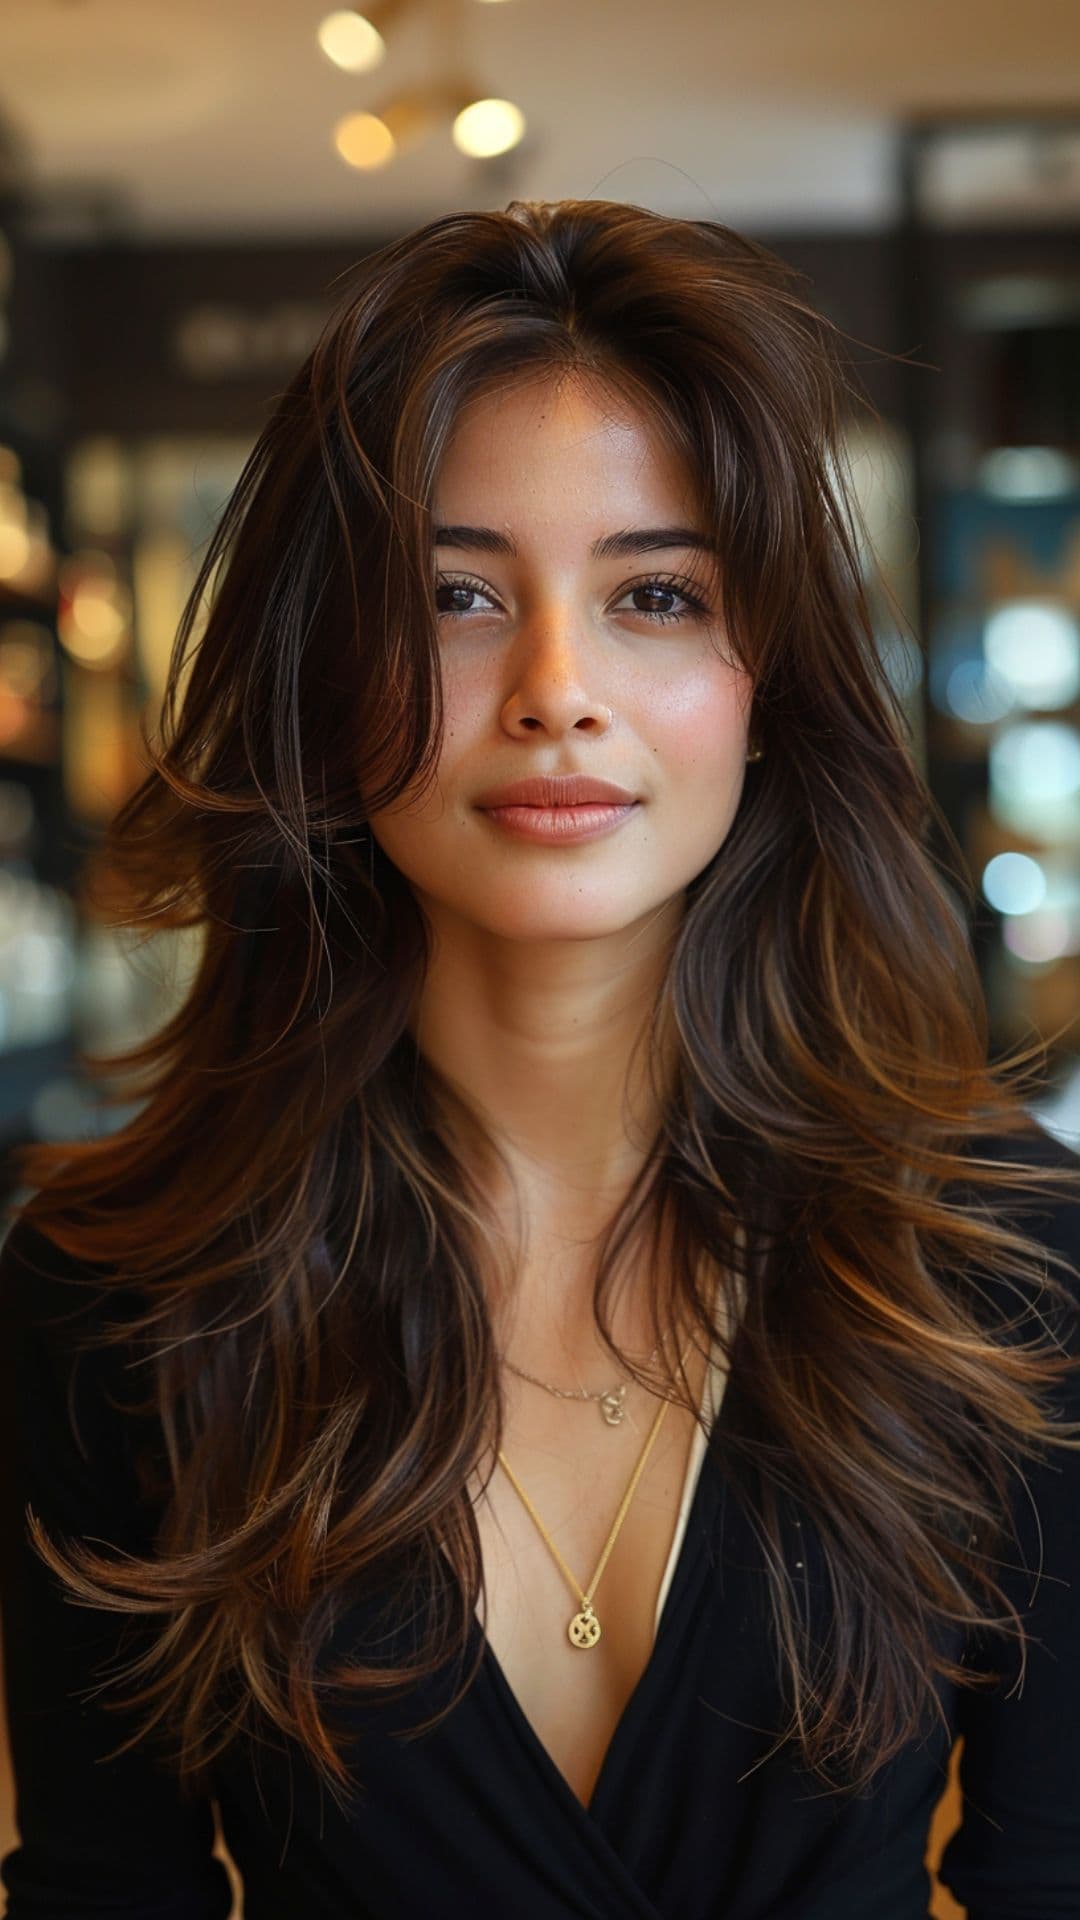 A woman modelling Priyanka Chopra's long, layered hair with middle part.